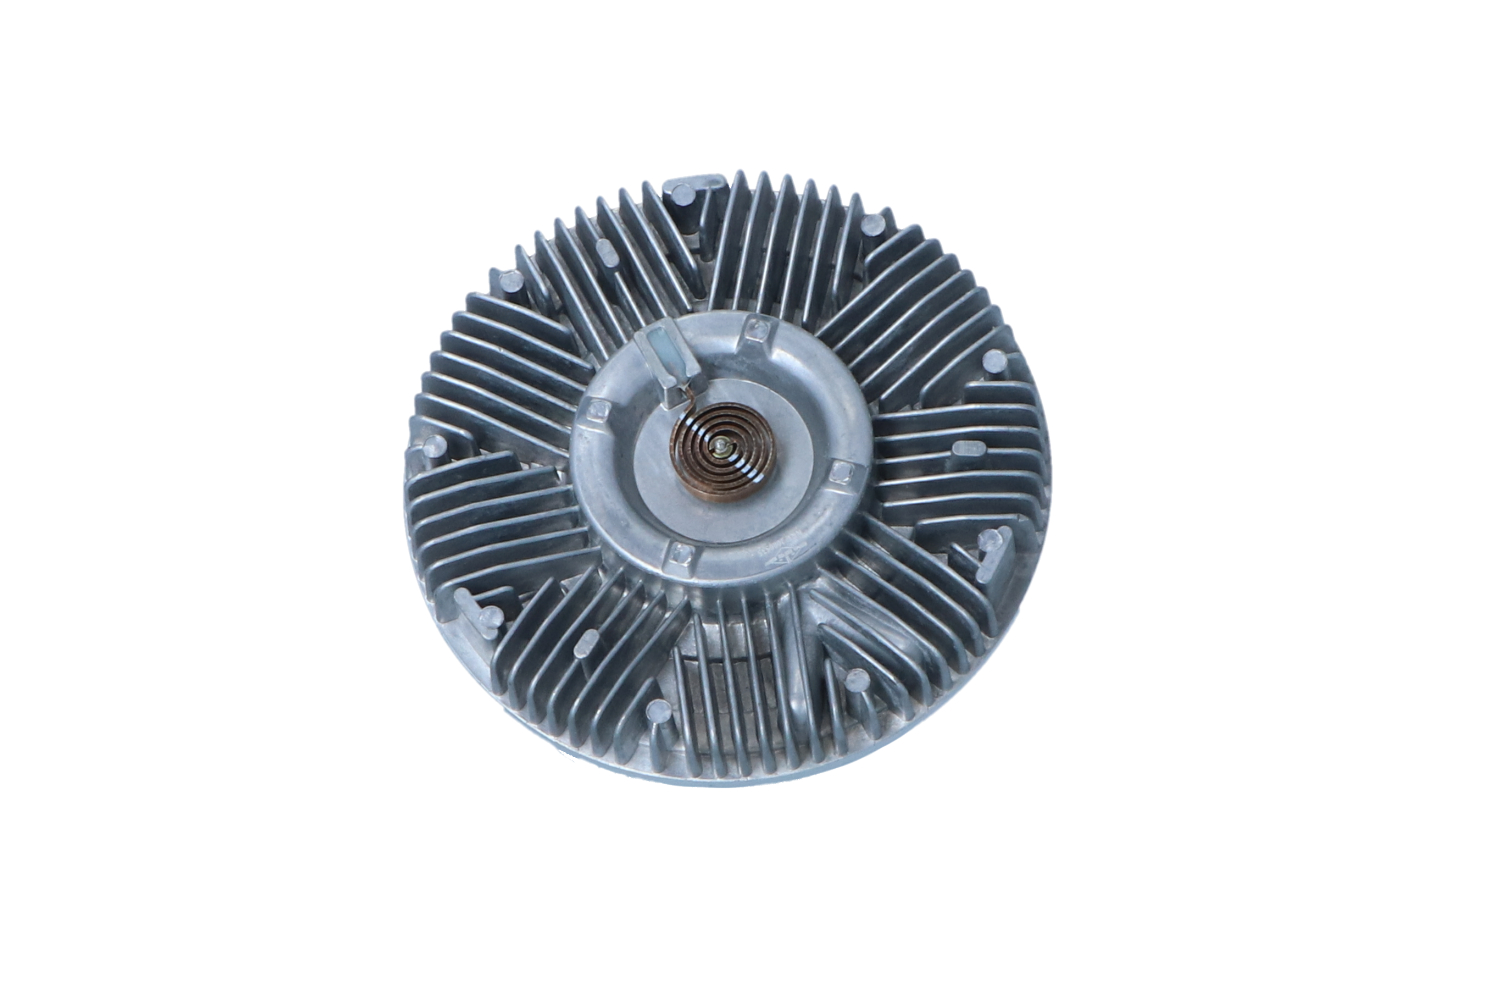 NRF 49596 Fan clutch FORD USA experience and price